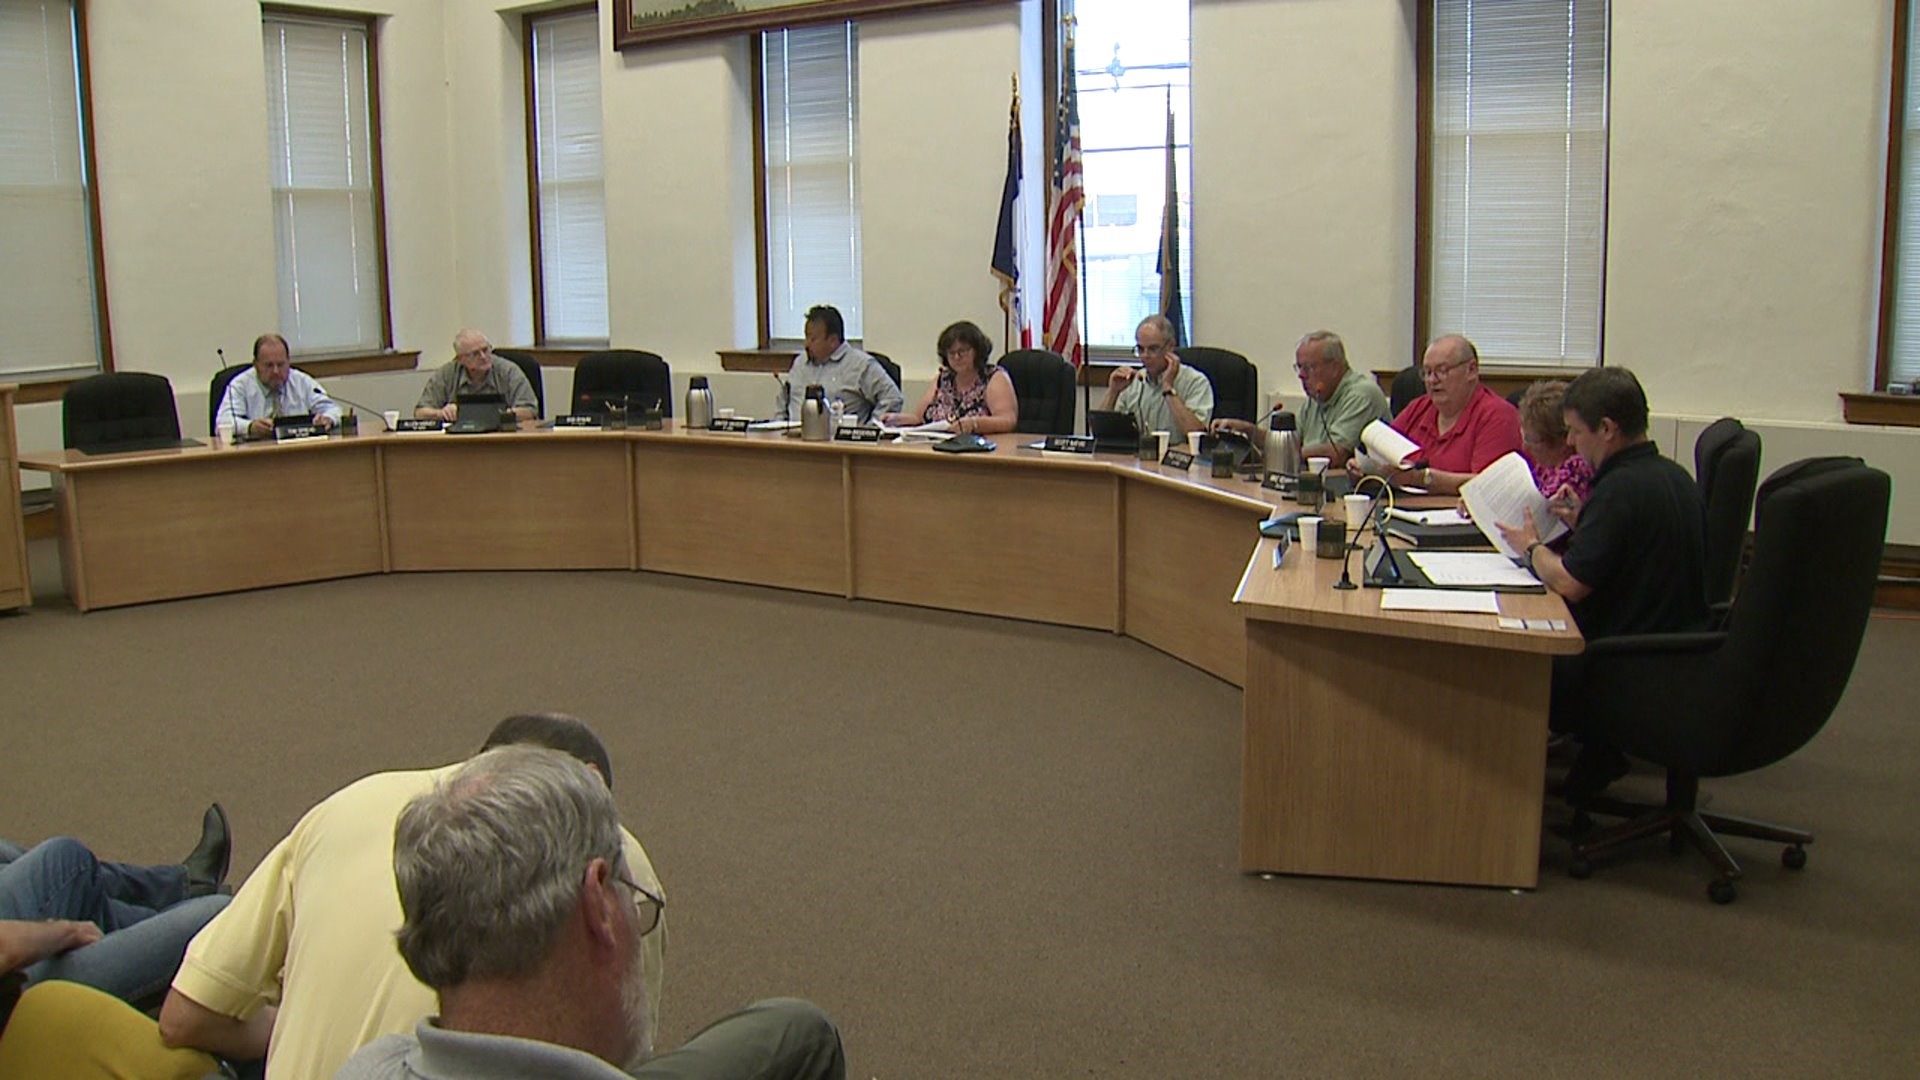 Mayor first council meeting since being reinstated